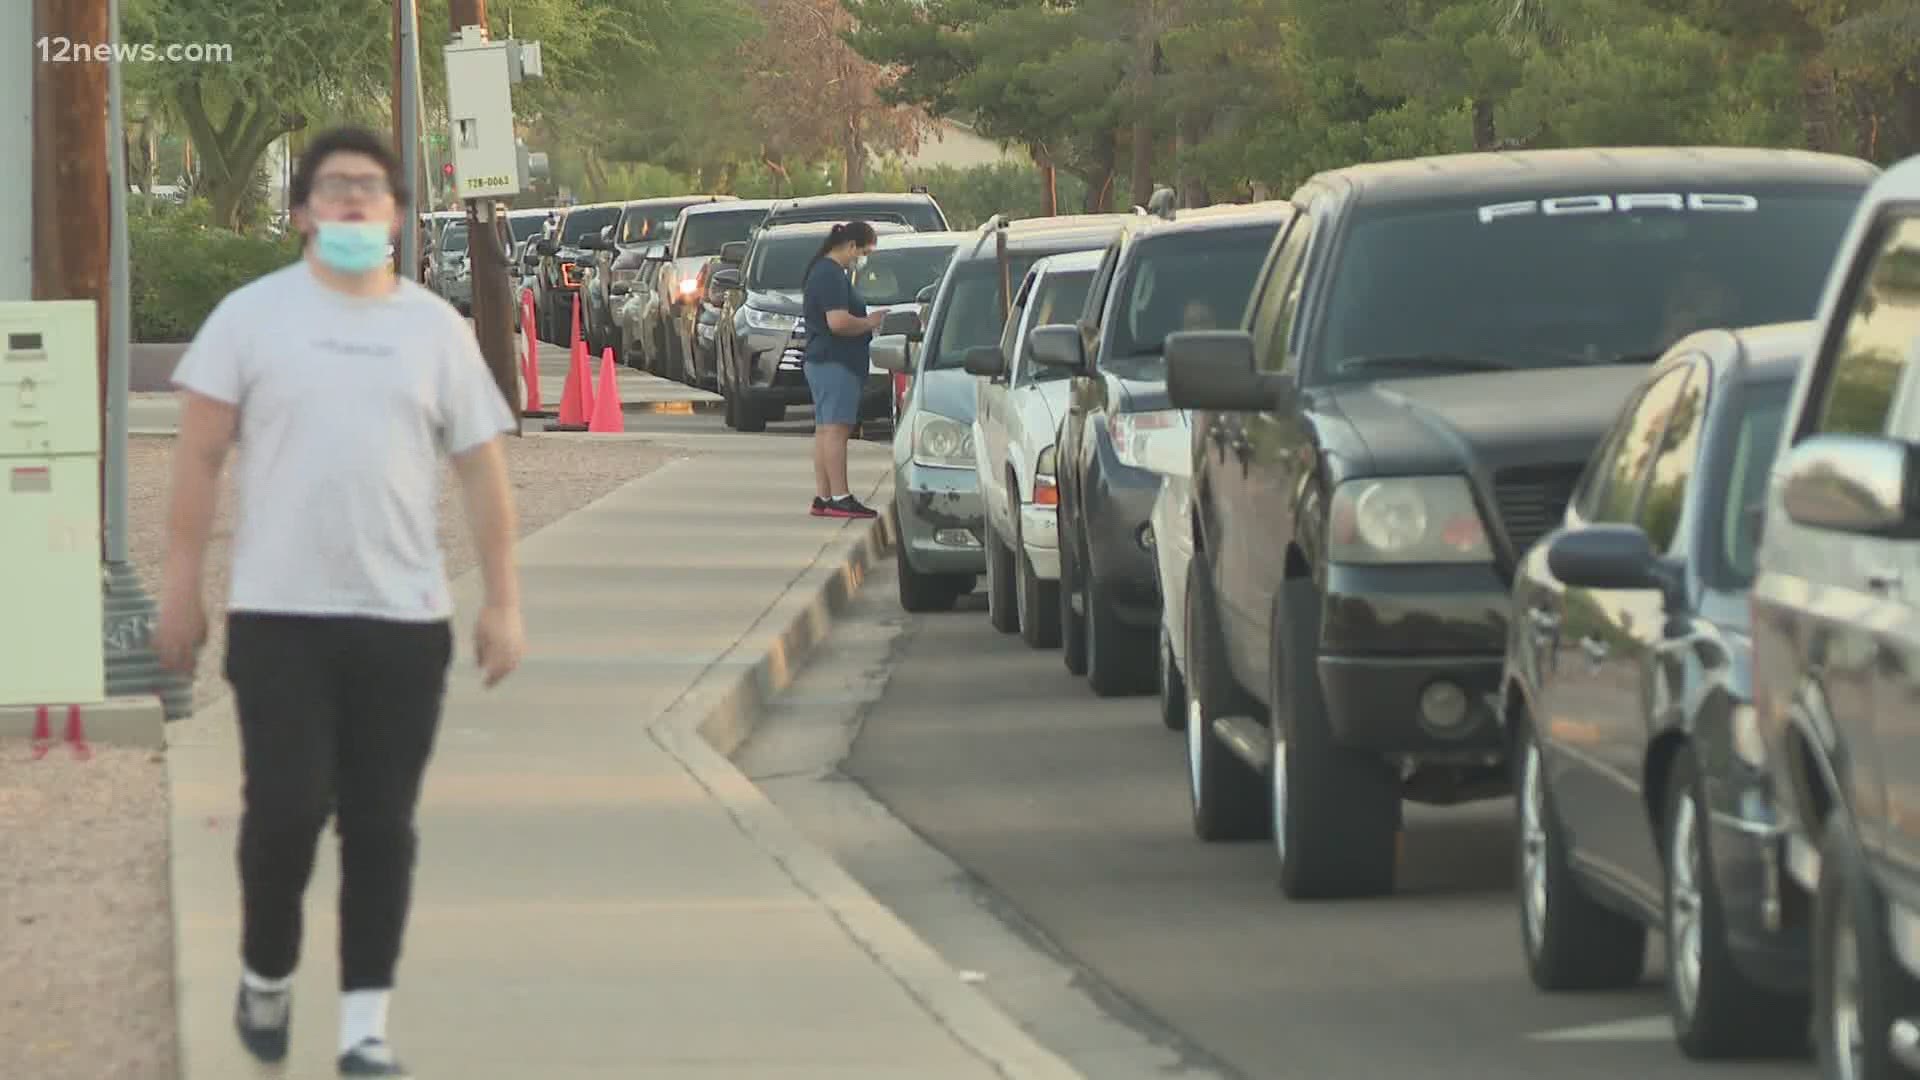 In South Phoenix for the second day in a row, vehicles were lined up with people waiting for hours to get tested for COVID-19.